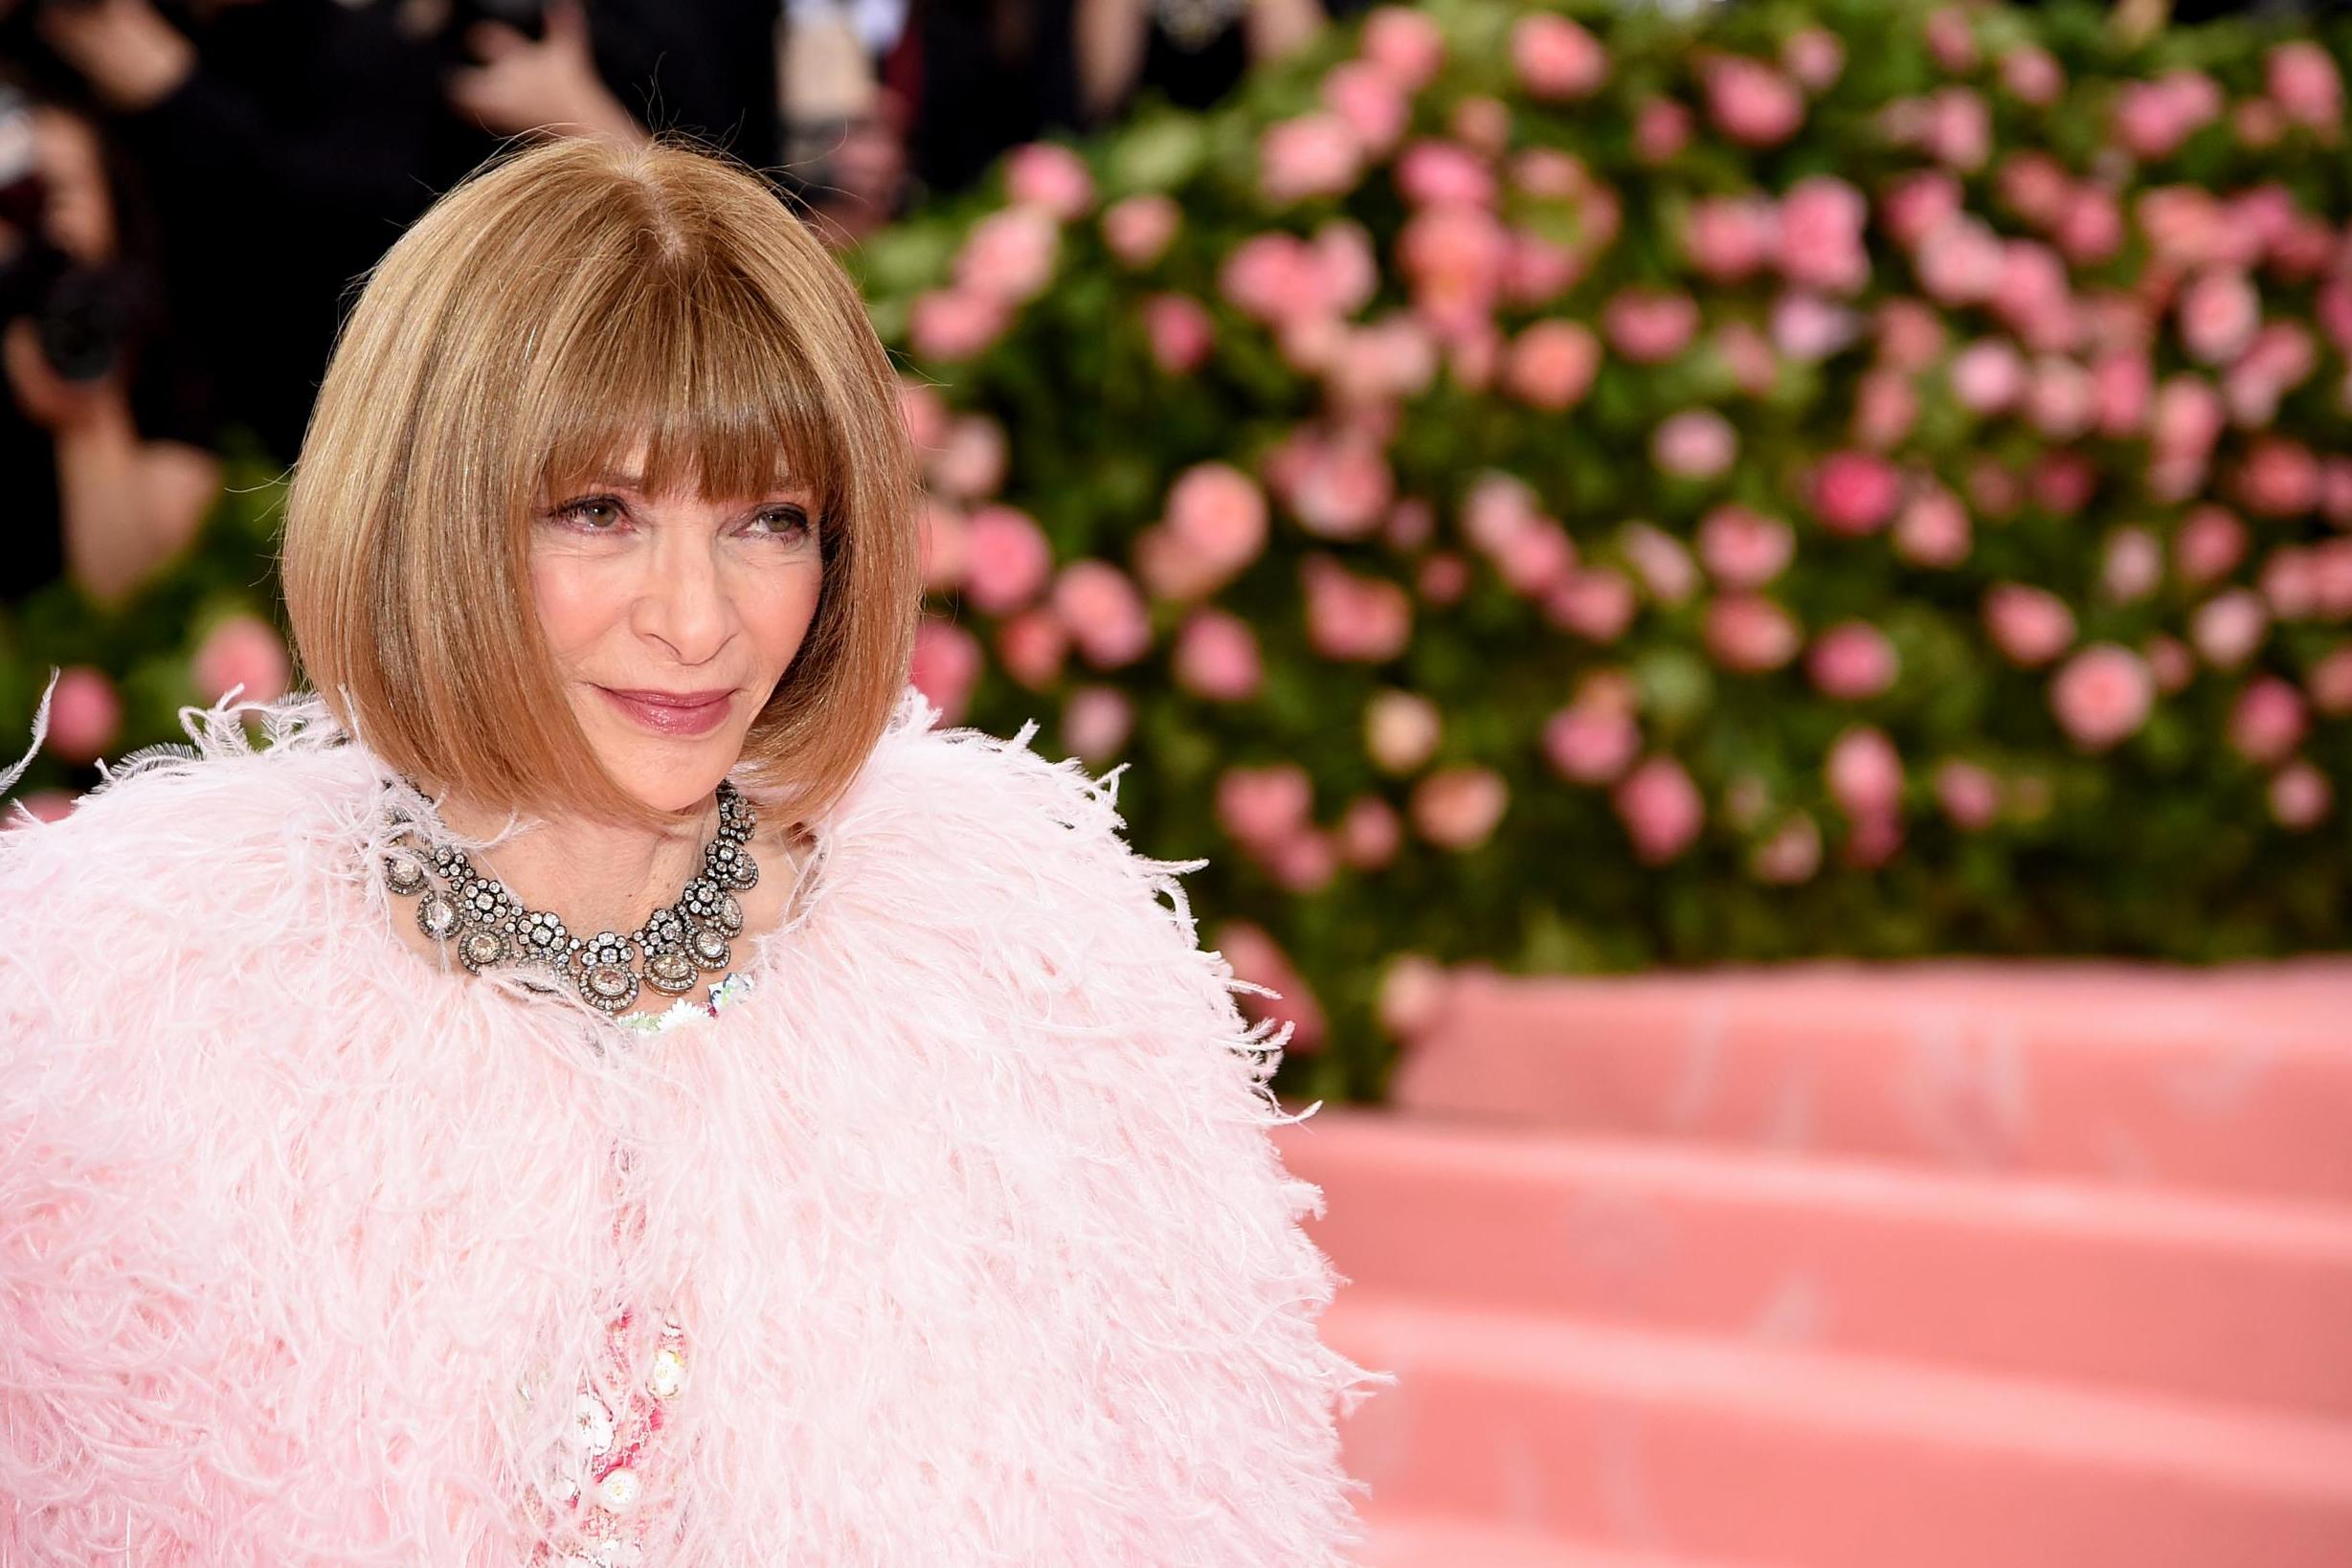 Anna Wintour at the 2019 Met Gala in New York City.